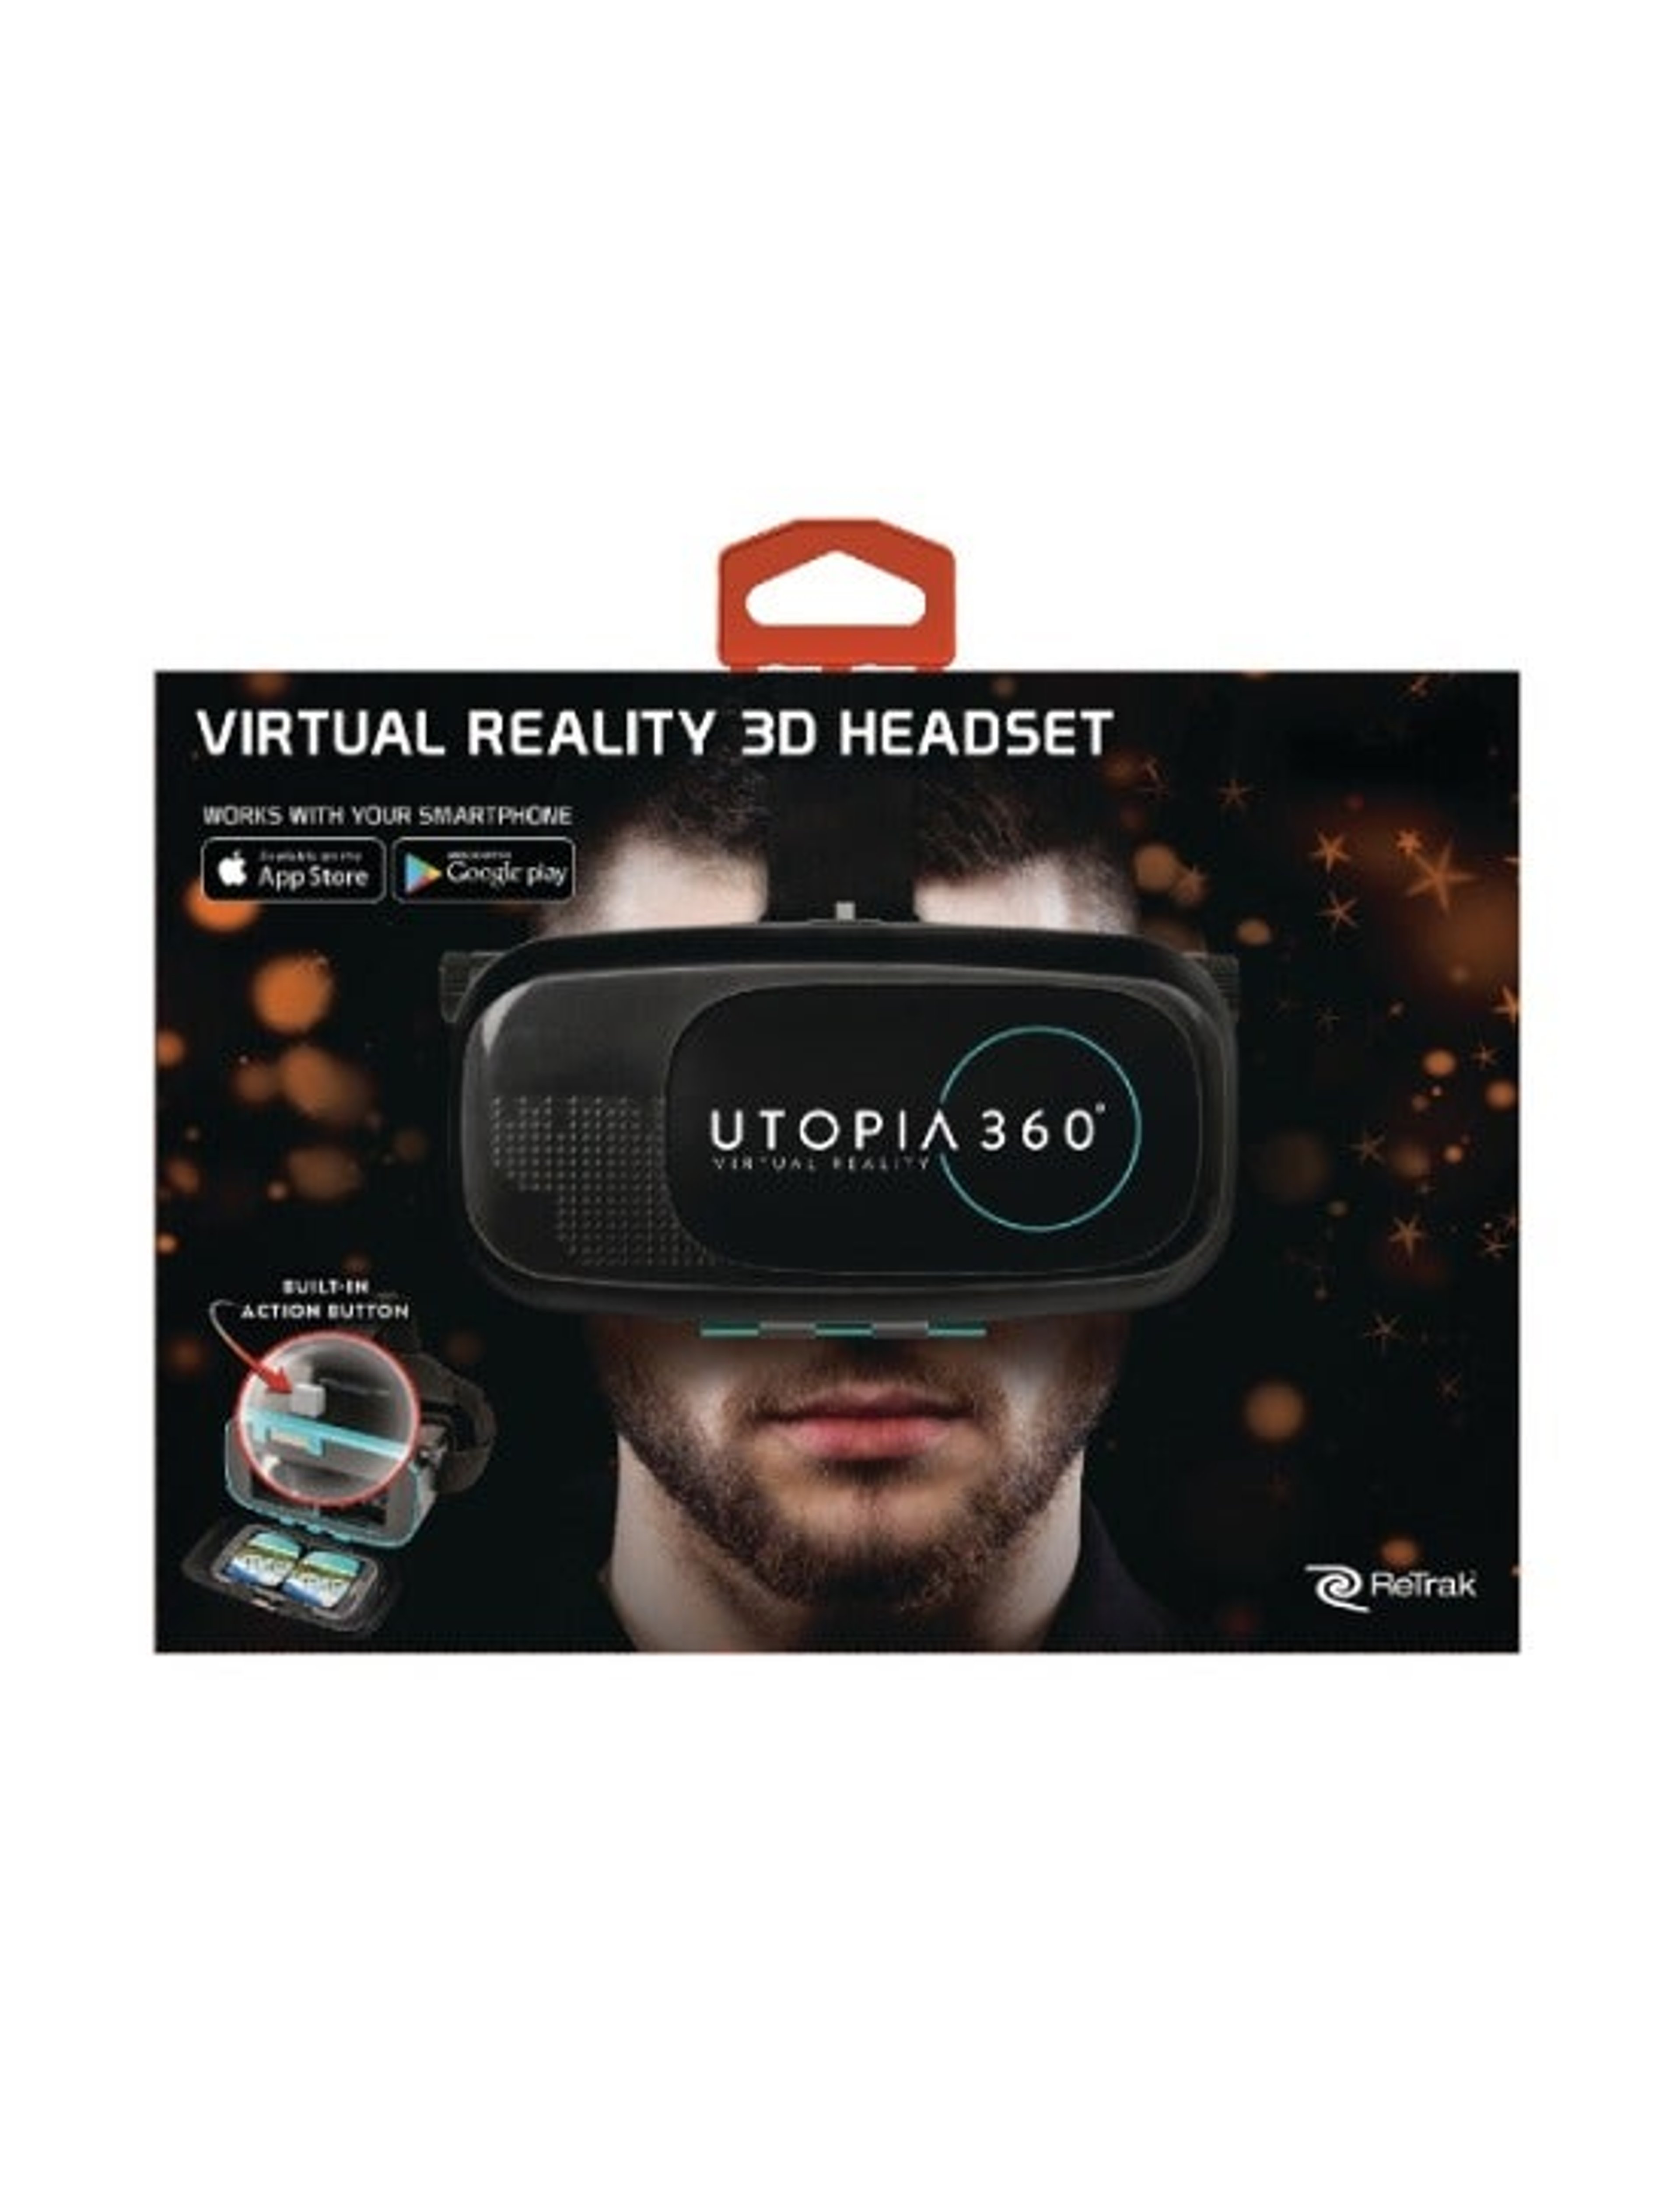 curt vernon recommends arcadia virtual reality 360 pic